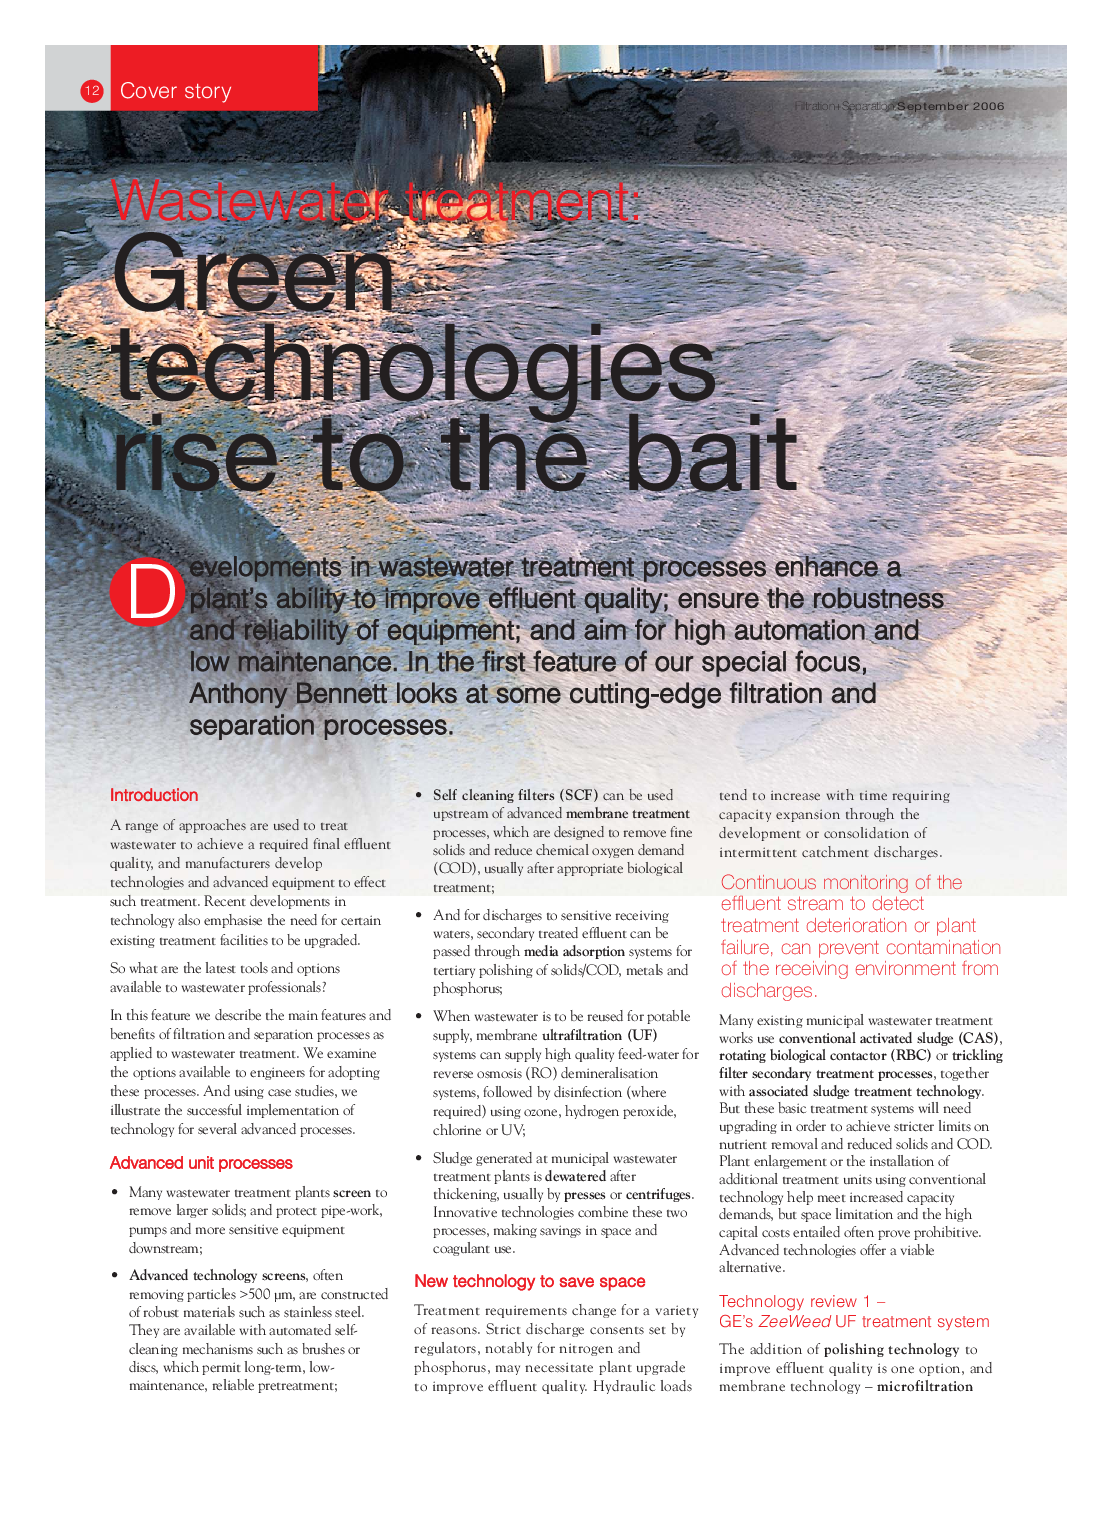 Wastewater treatment: Green technologies rise to the bait